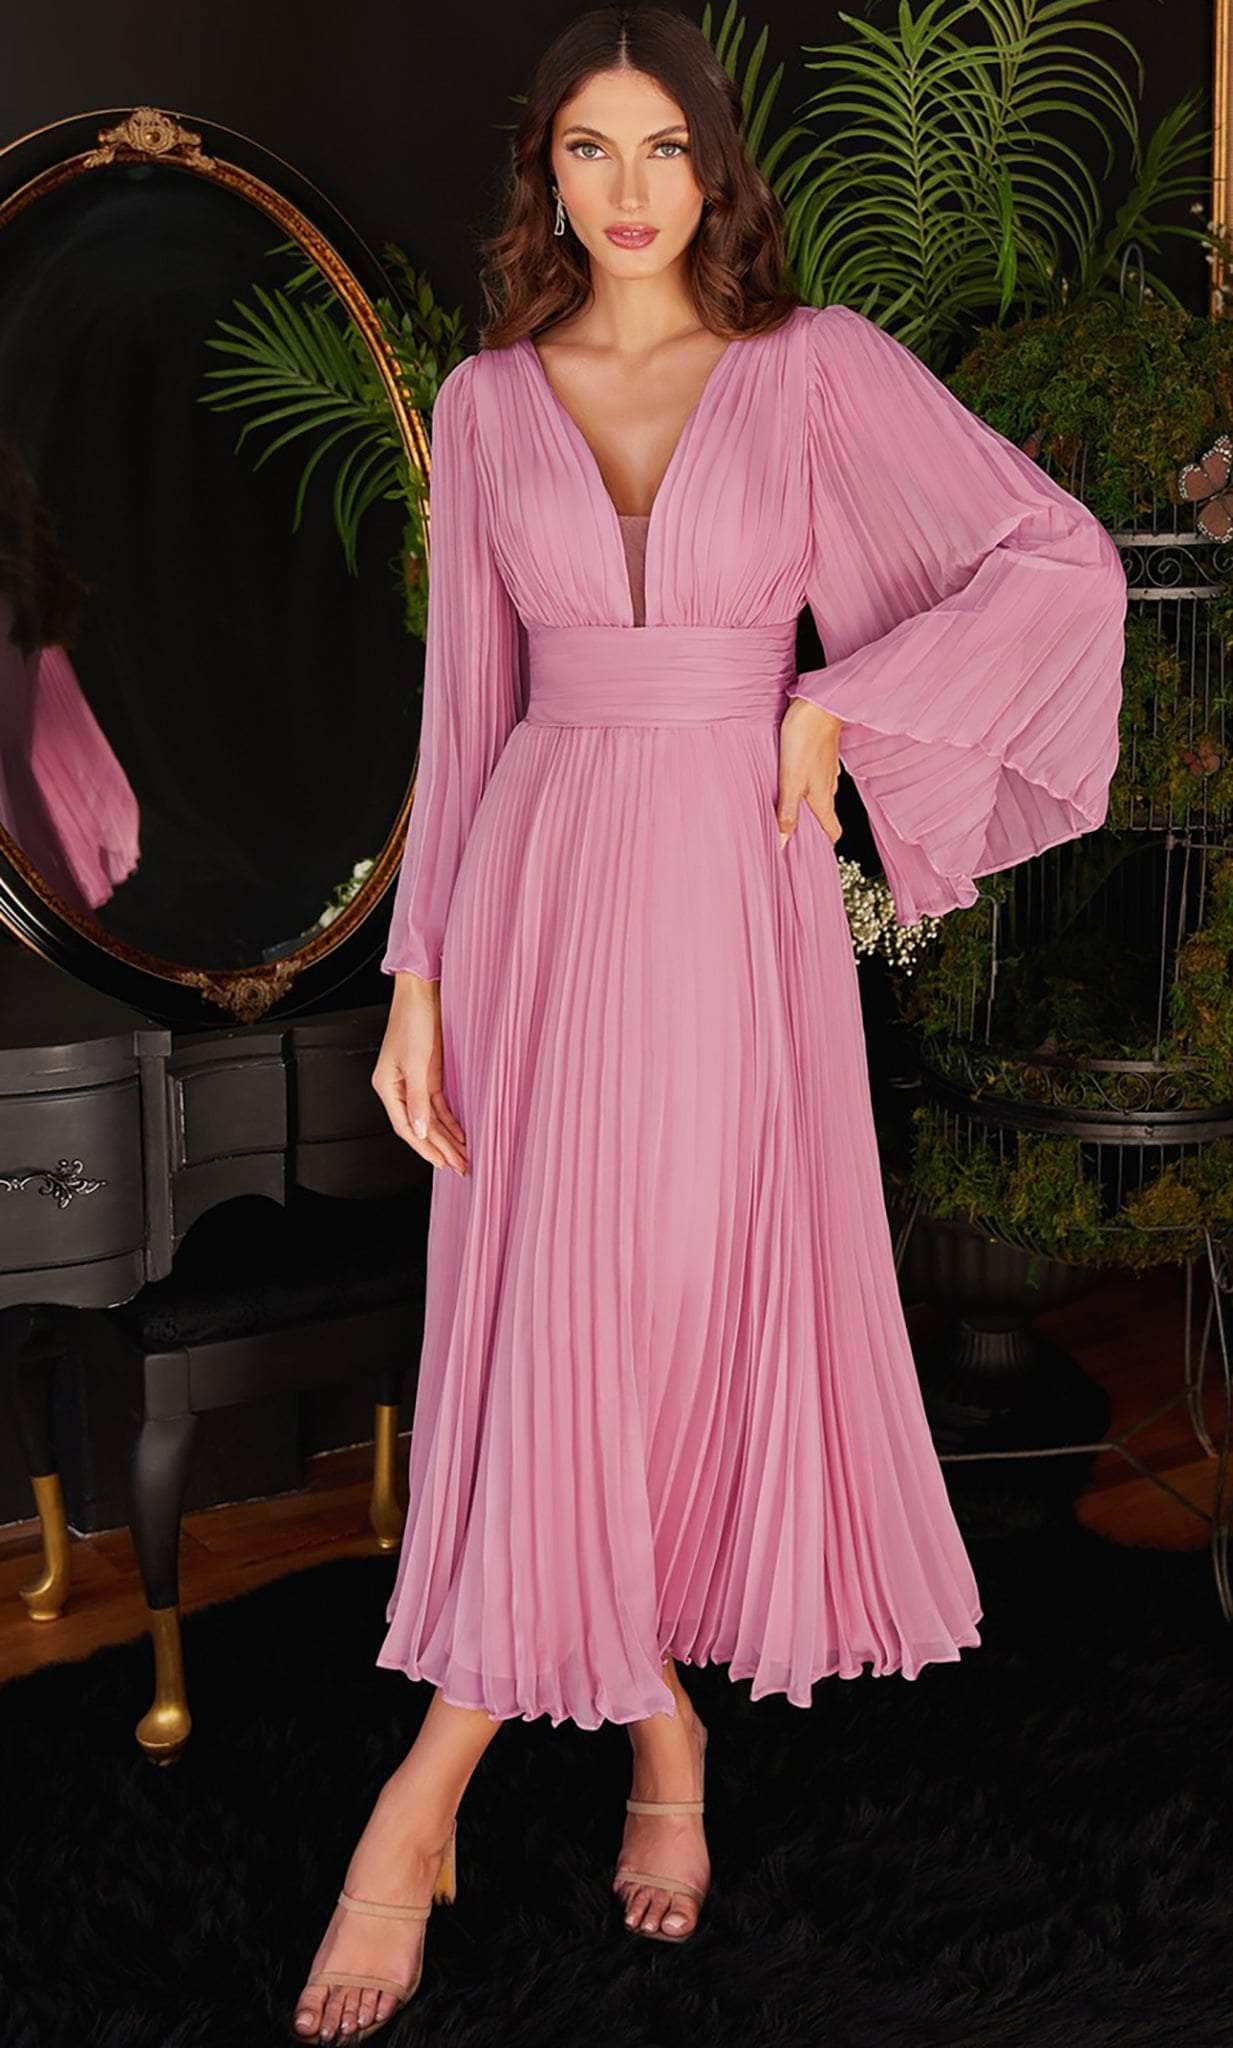 Unique Pink Chiffon Long Prom Dresses, Pleated Pink Formal Dresses, Pink  Evening Dresses